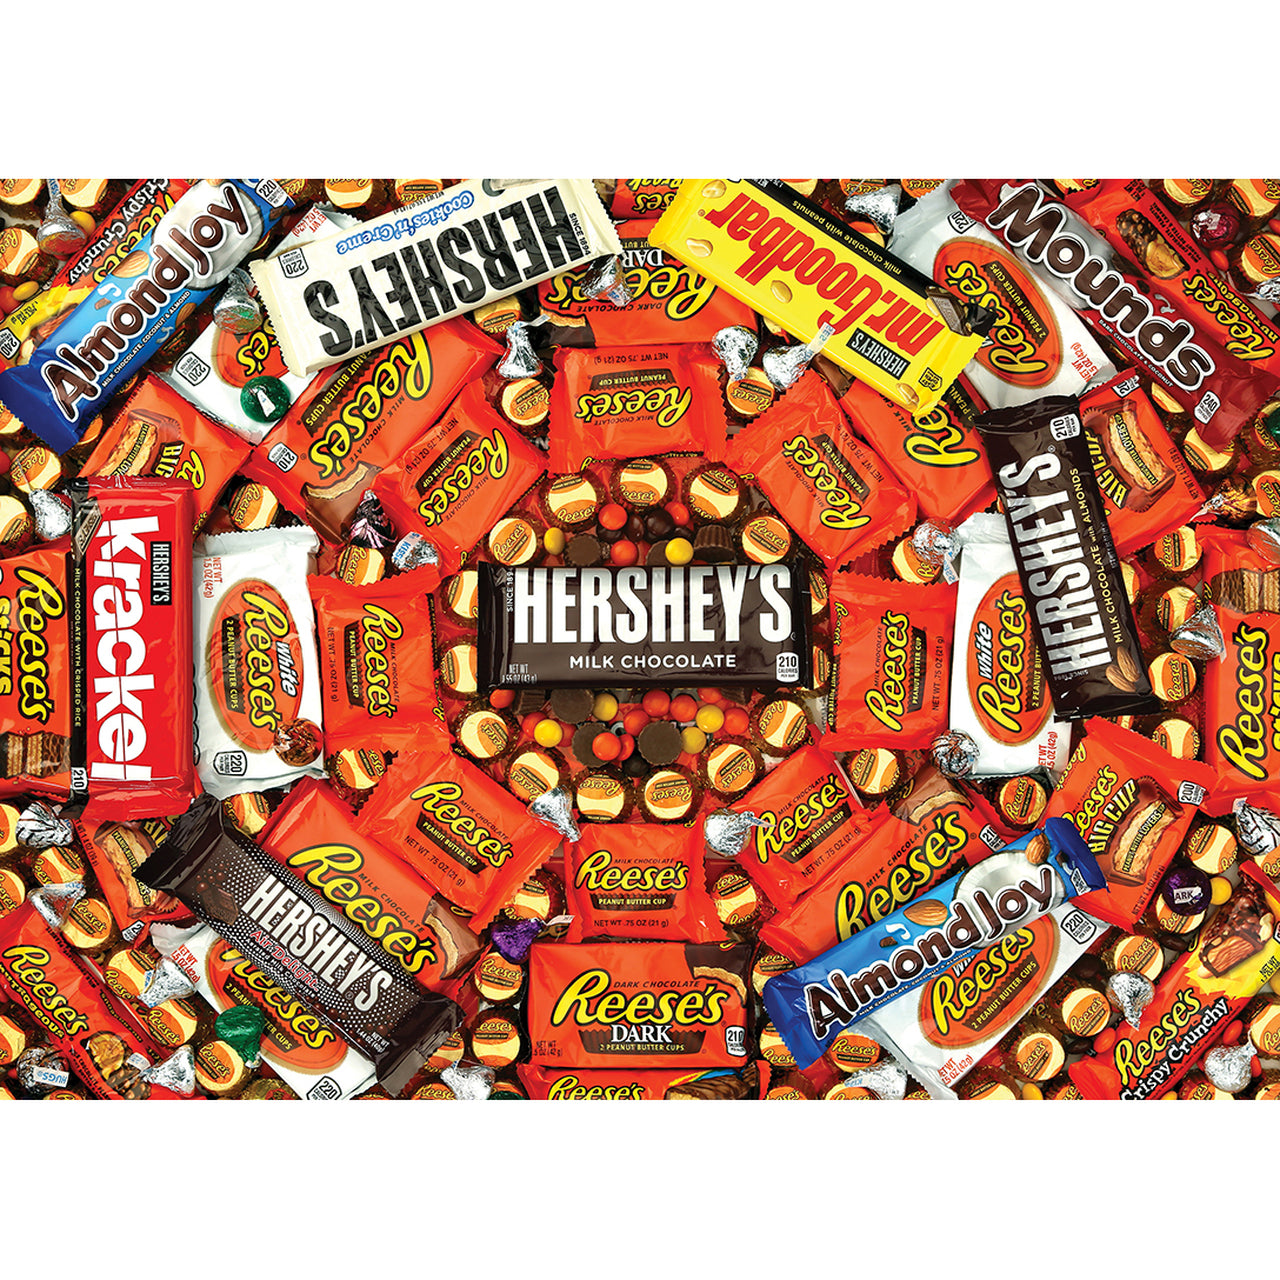 Hershey's Swirl - Chocolate Collage 1000 Piece Jigsaw Puzzle by Masterpieces